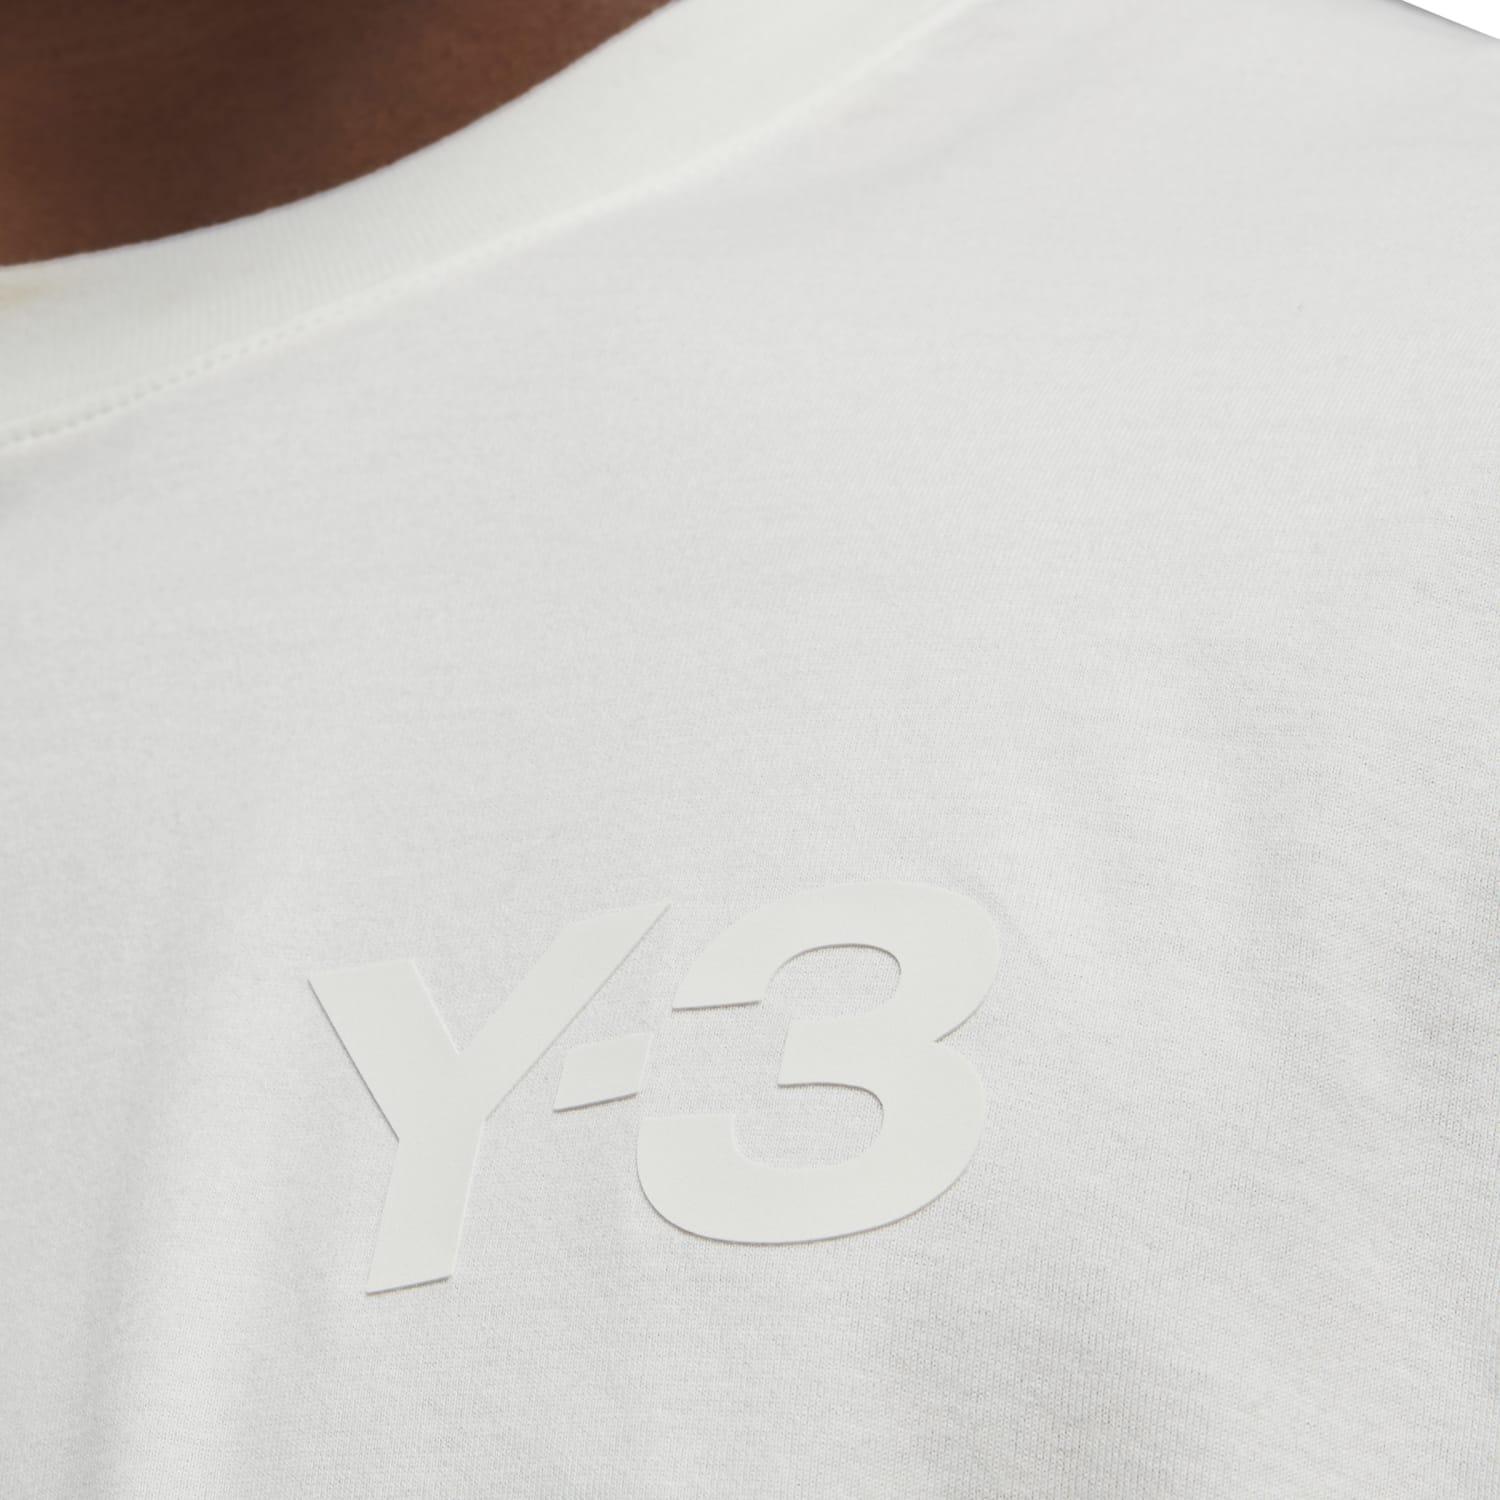 adidas courtvantage Men Y - 3 CL SS Tee WHite FN3359 - T - SHIRTS Canada